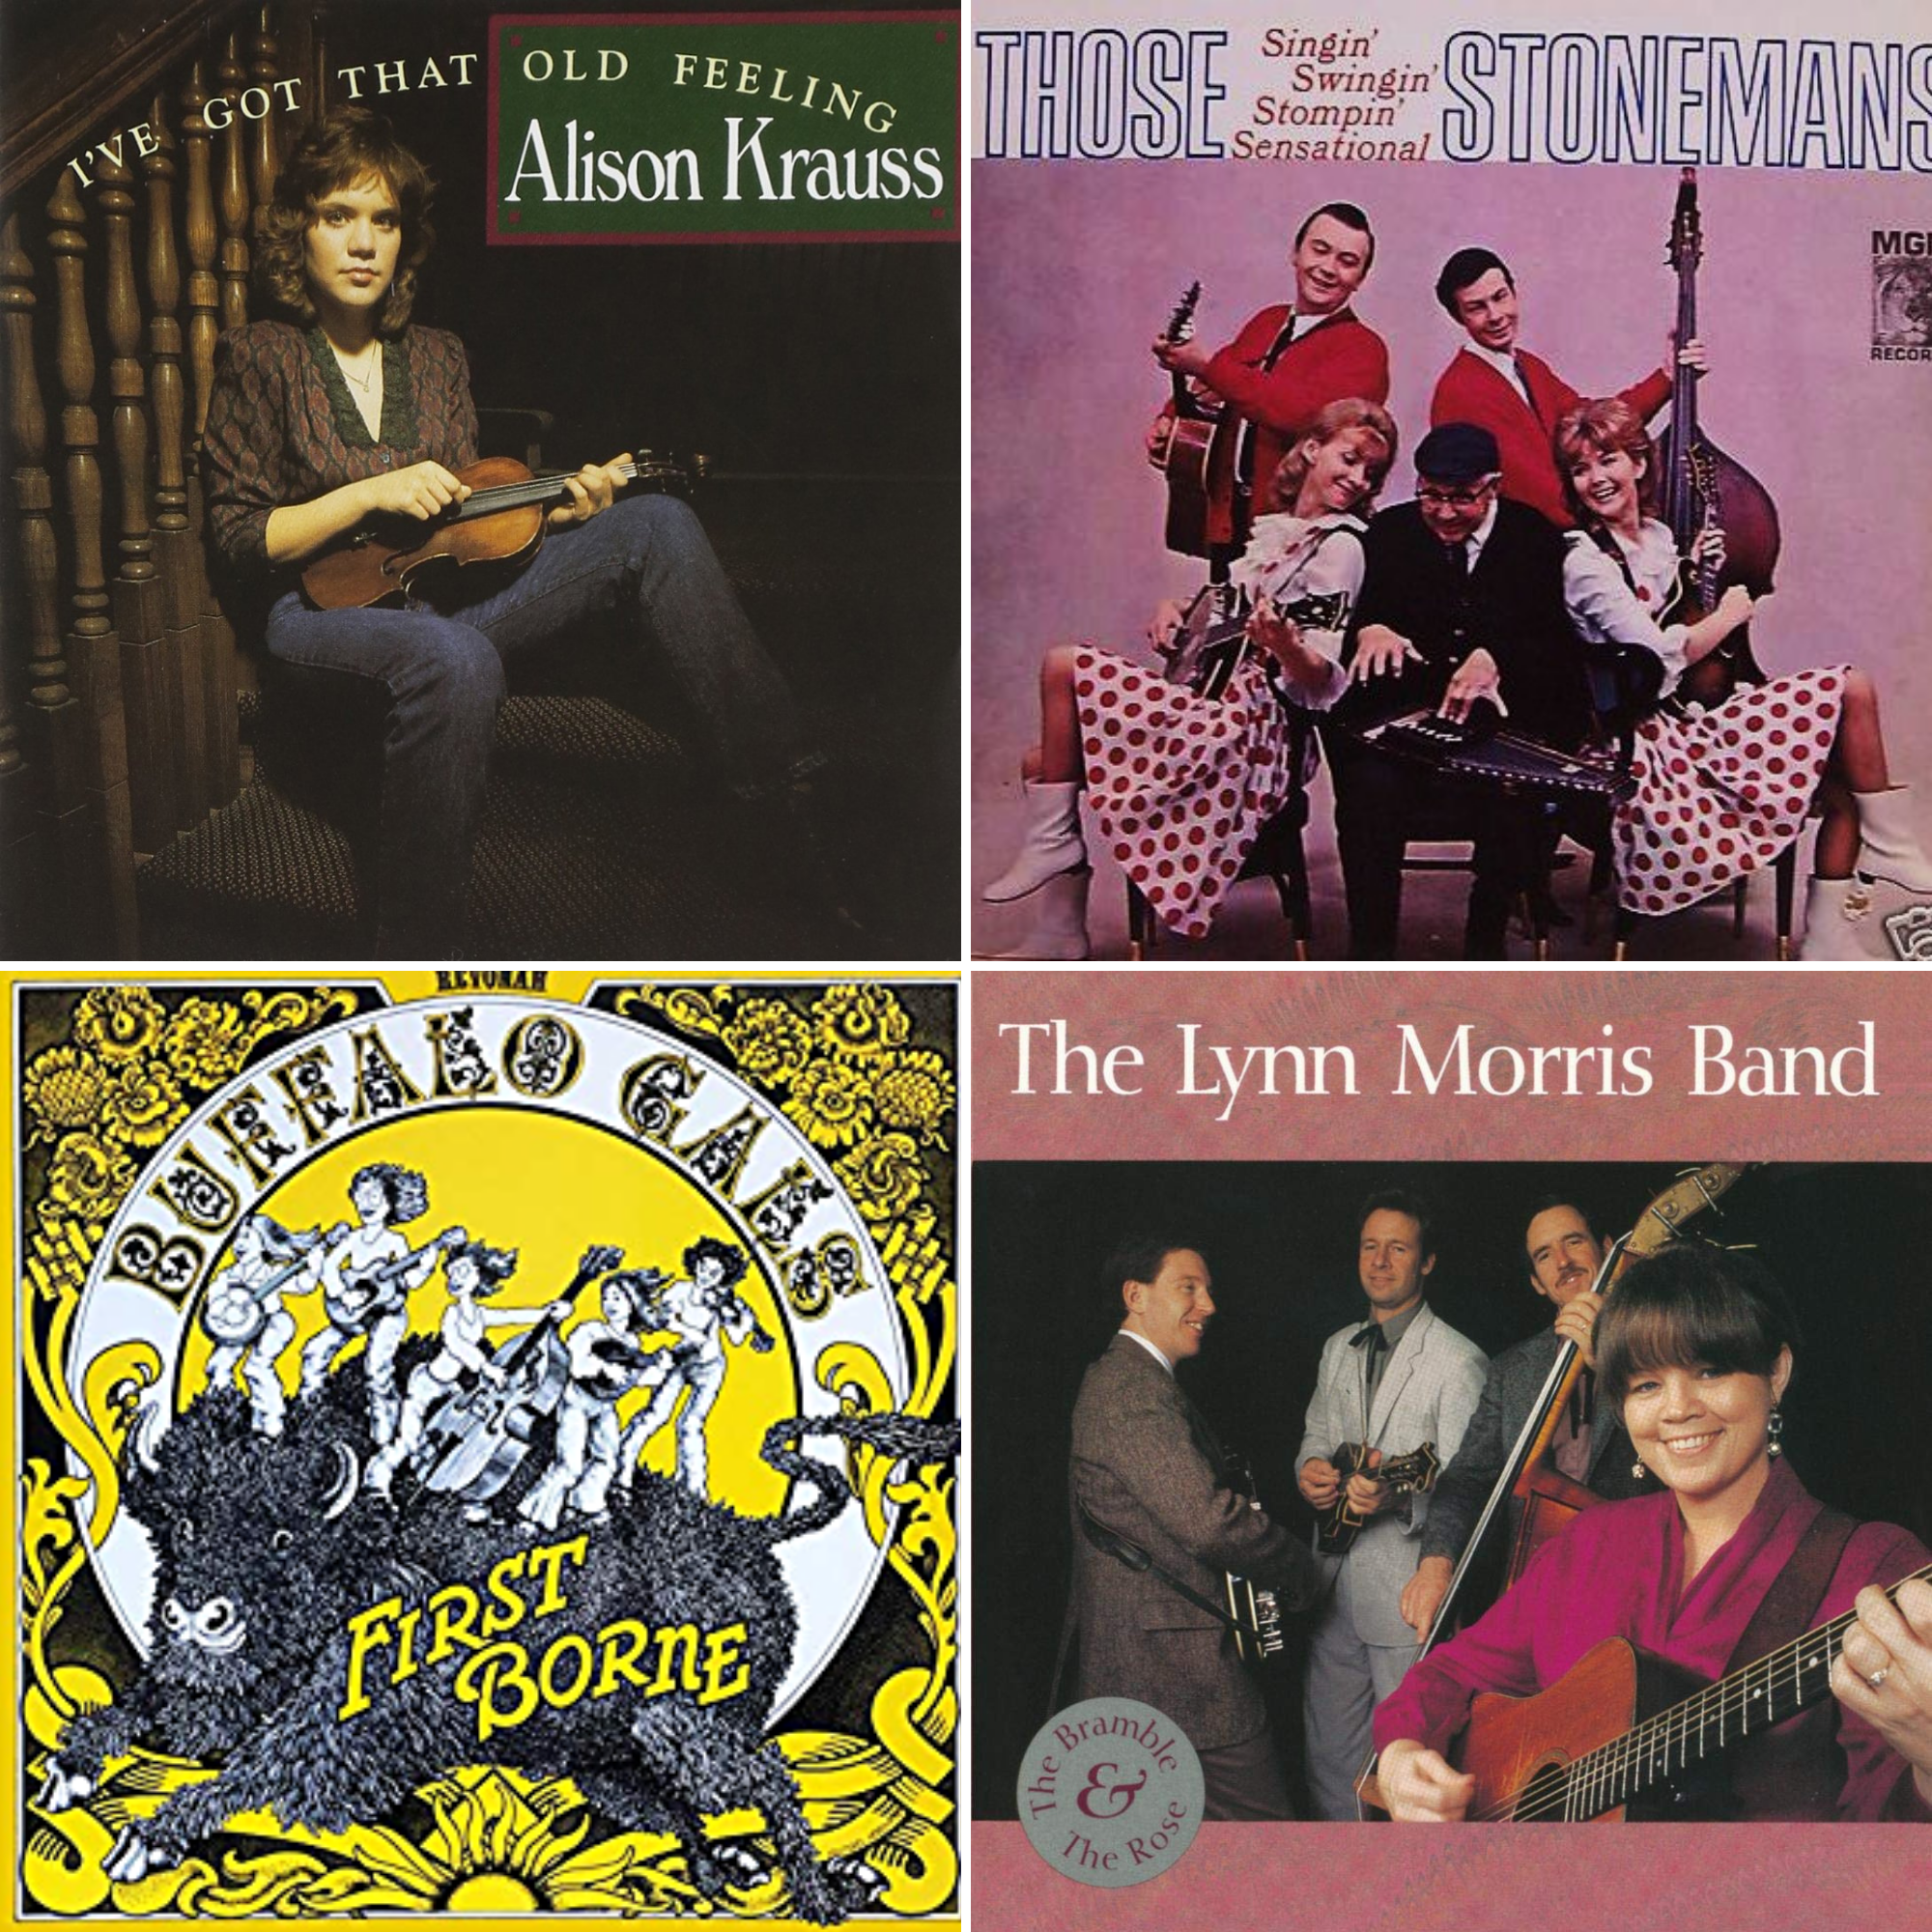 9 Bluegrass Songs to Whet Your Appetite